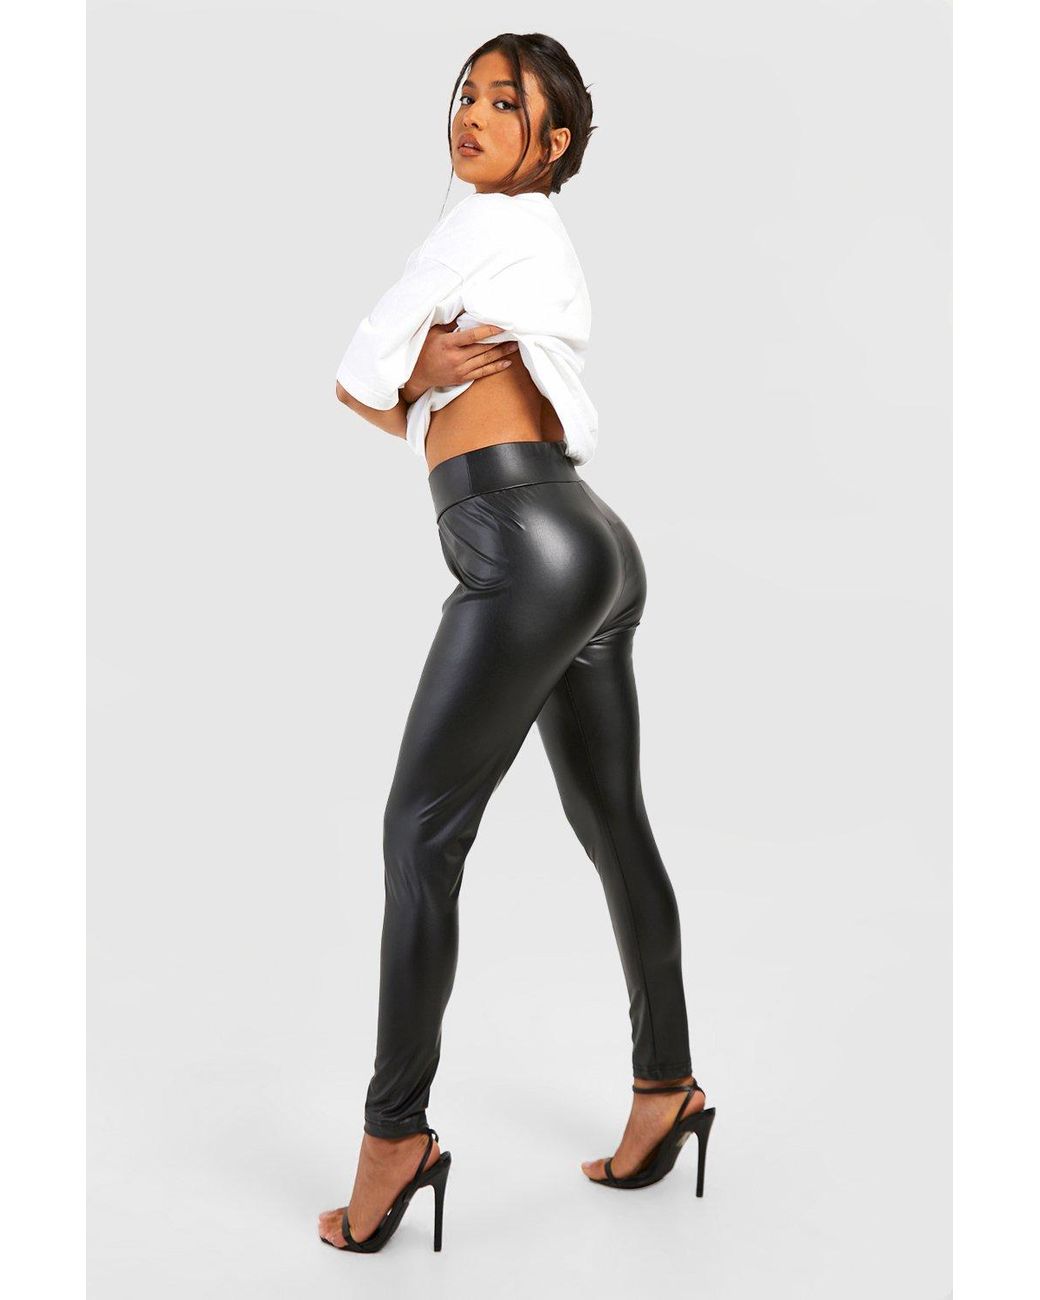 Boohoo Petite Super Stretch Waist Shaping Leather Look Leggings in